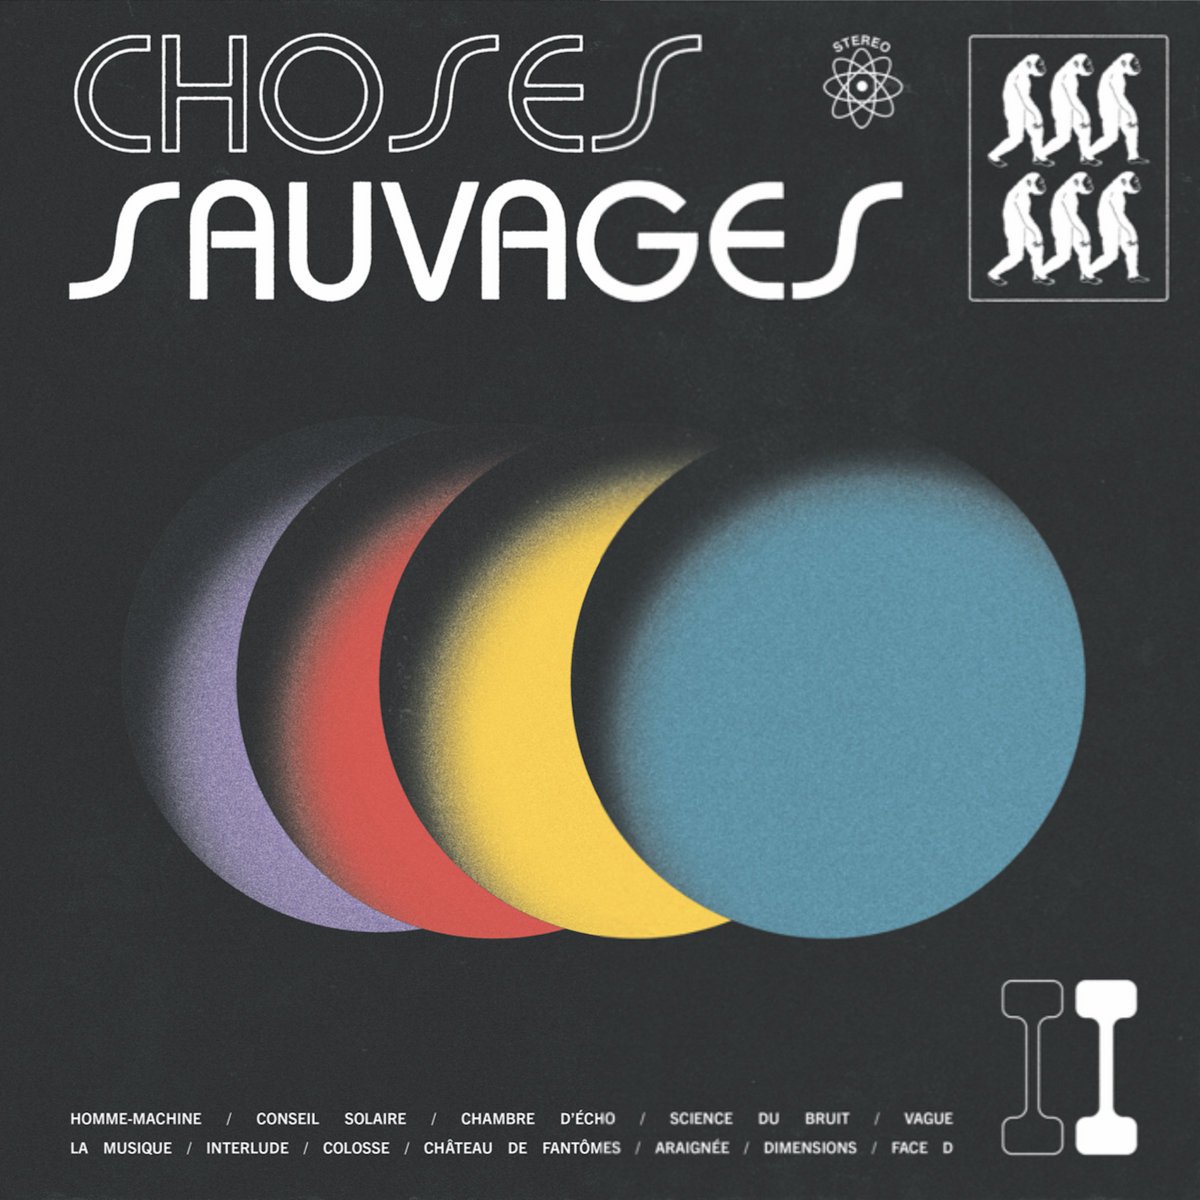 CD Shop - CHOSES SAUVAGES CHOSES SAUVAGES II